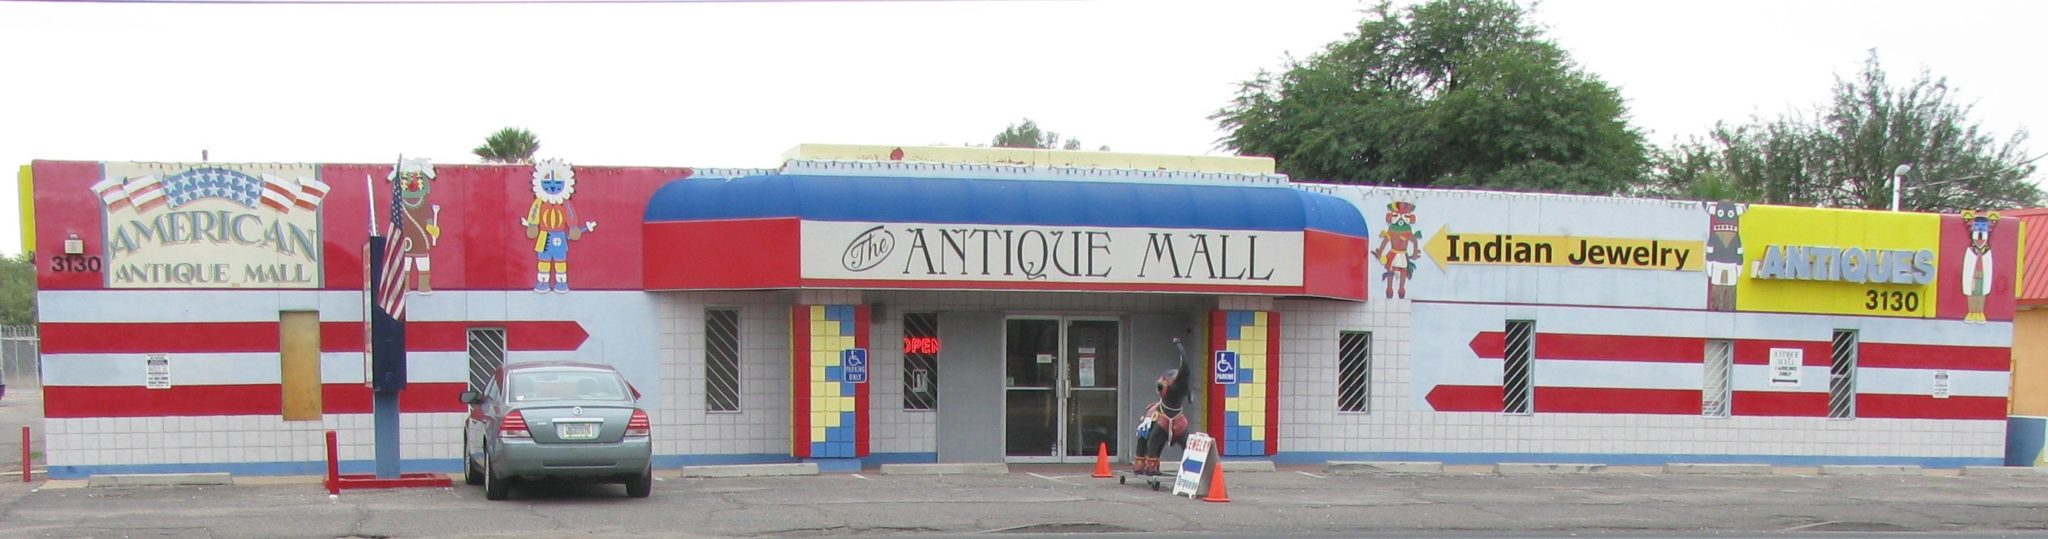 Mall antique american great jacksonville aisles vendors individual lead wide many open